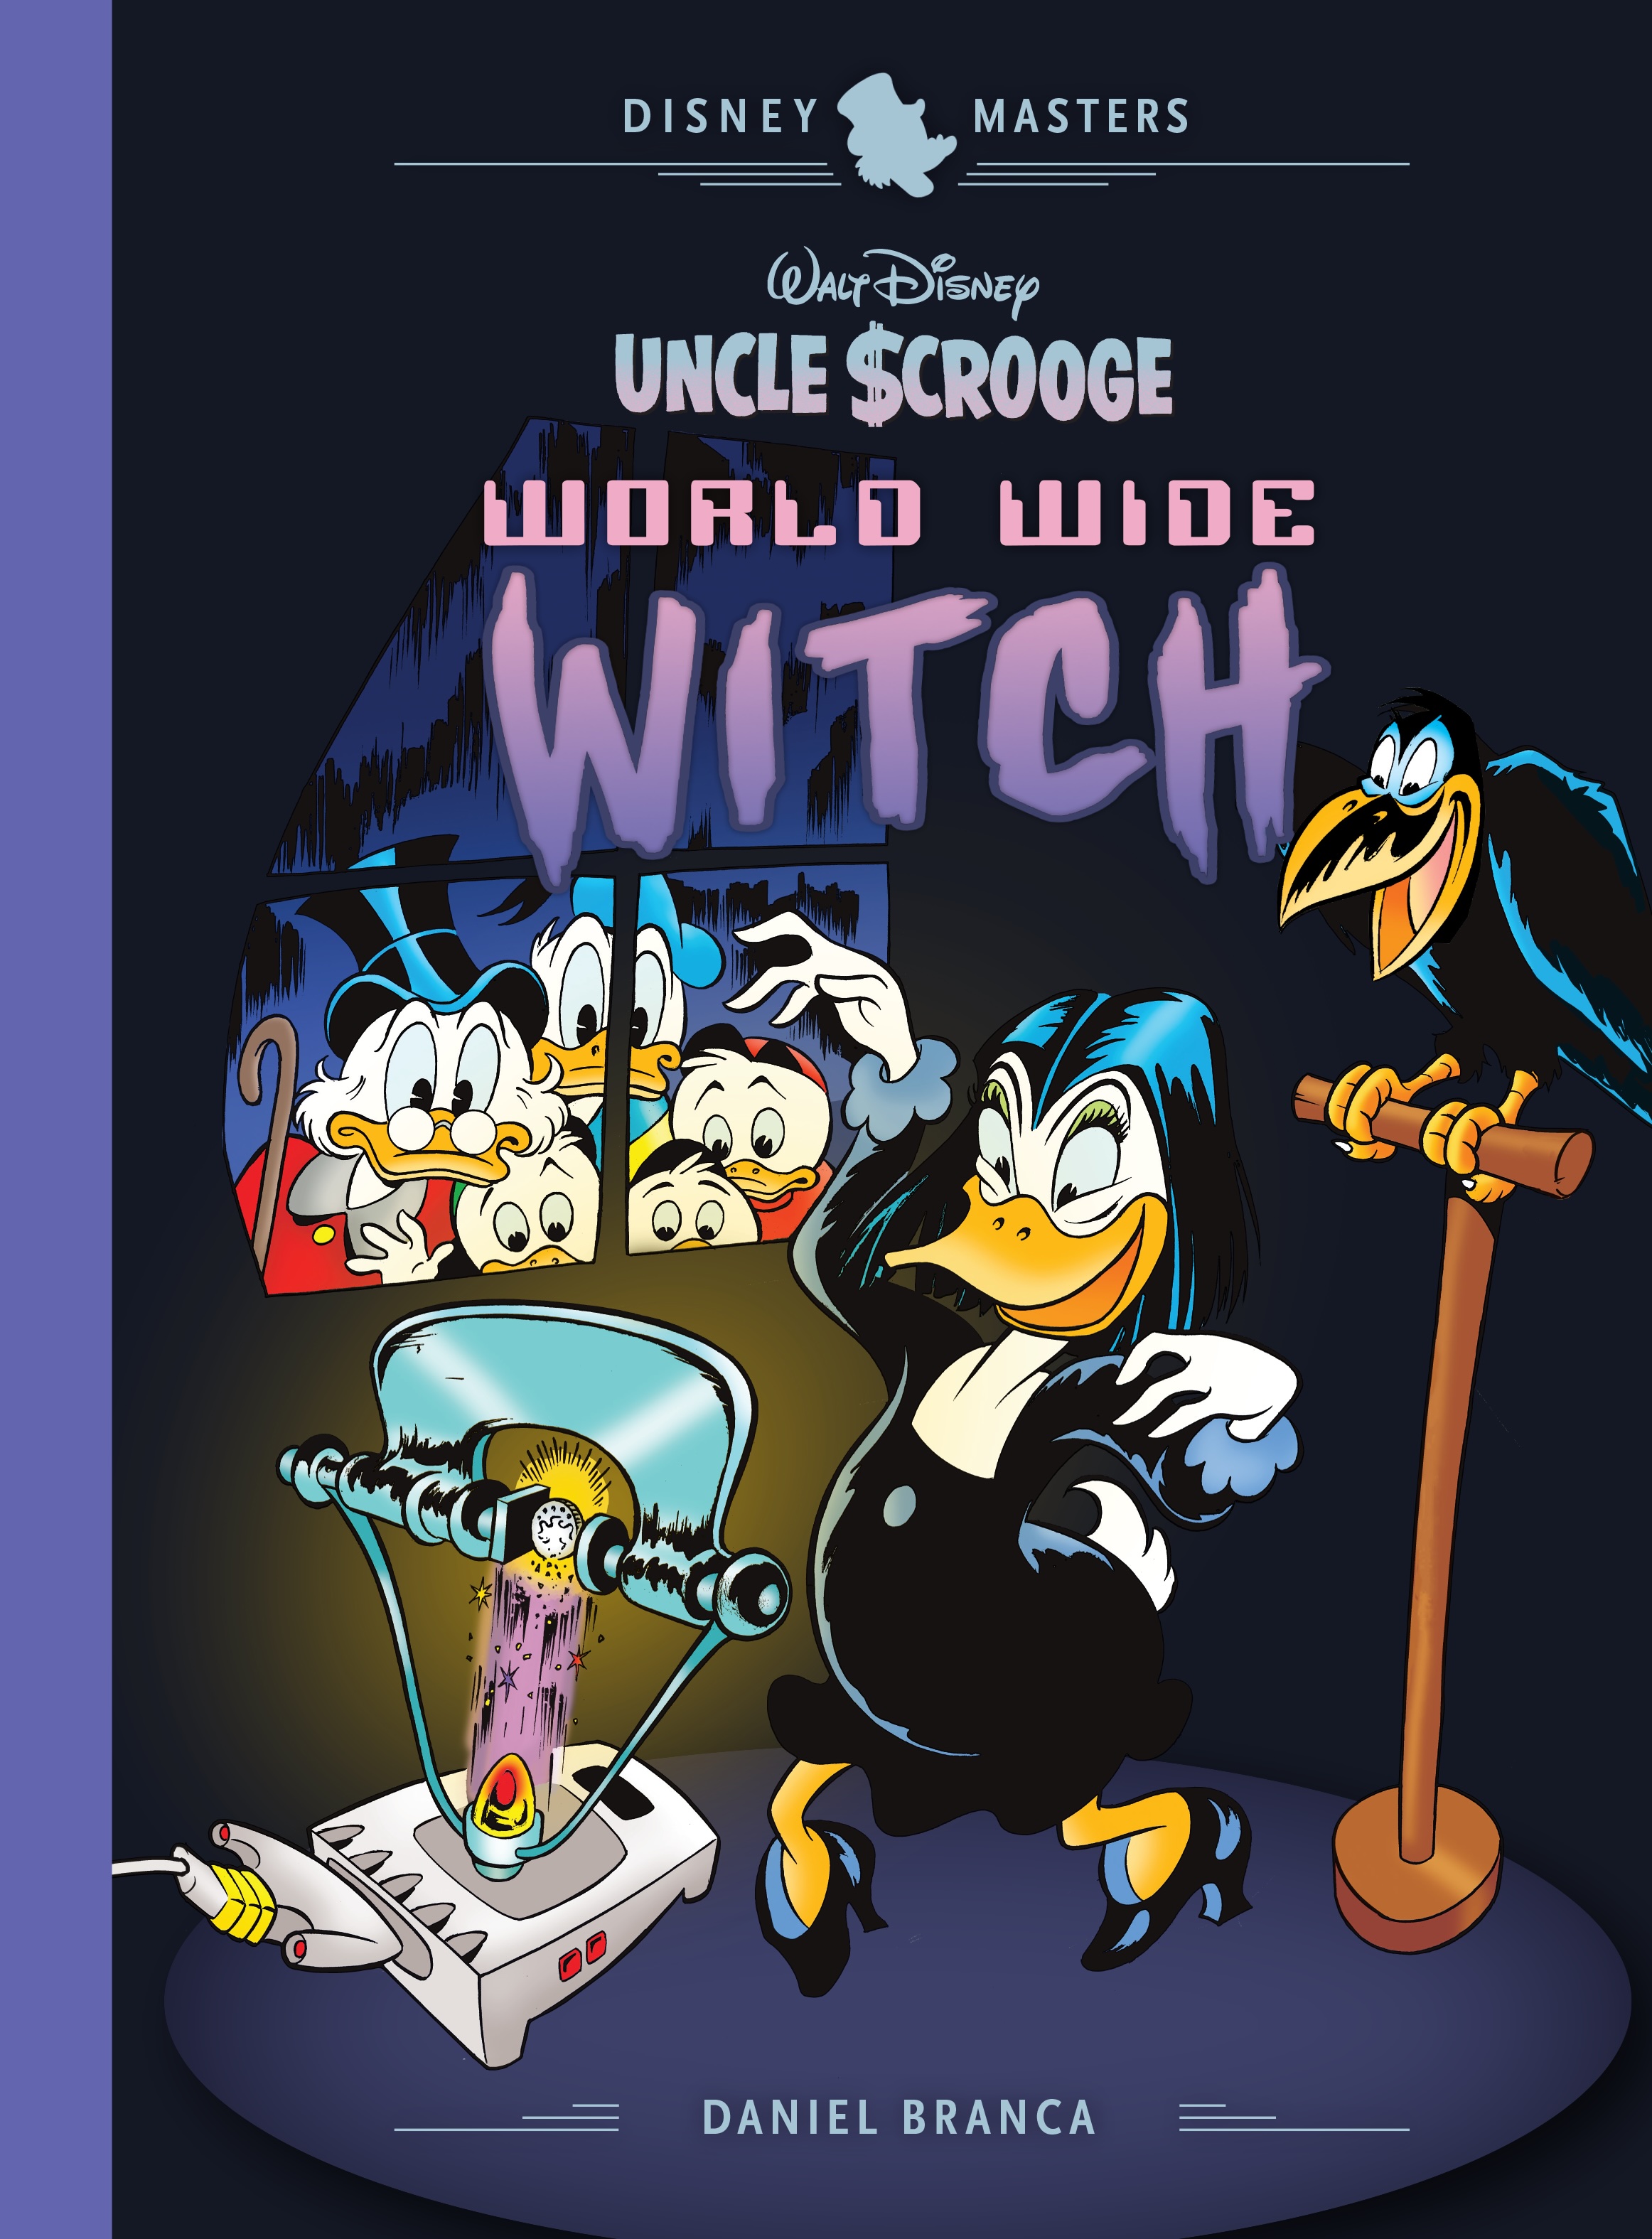 Disney Masters Hardcover Volume 24 Uncle Scrooge World Wide Witch Disney Master